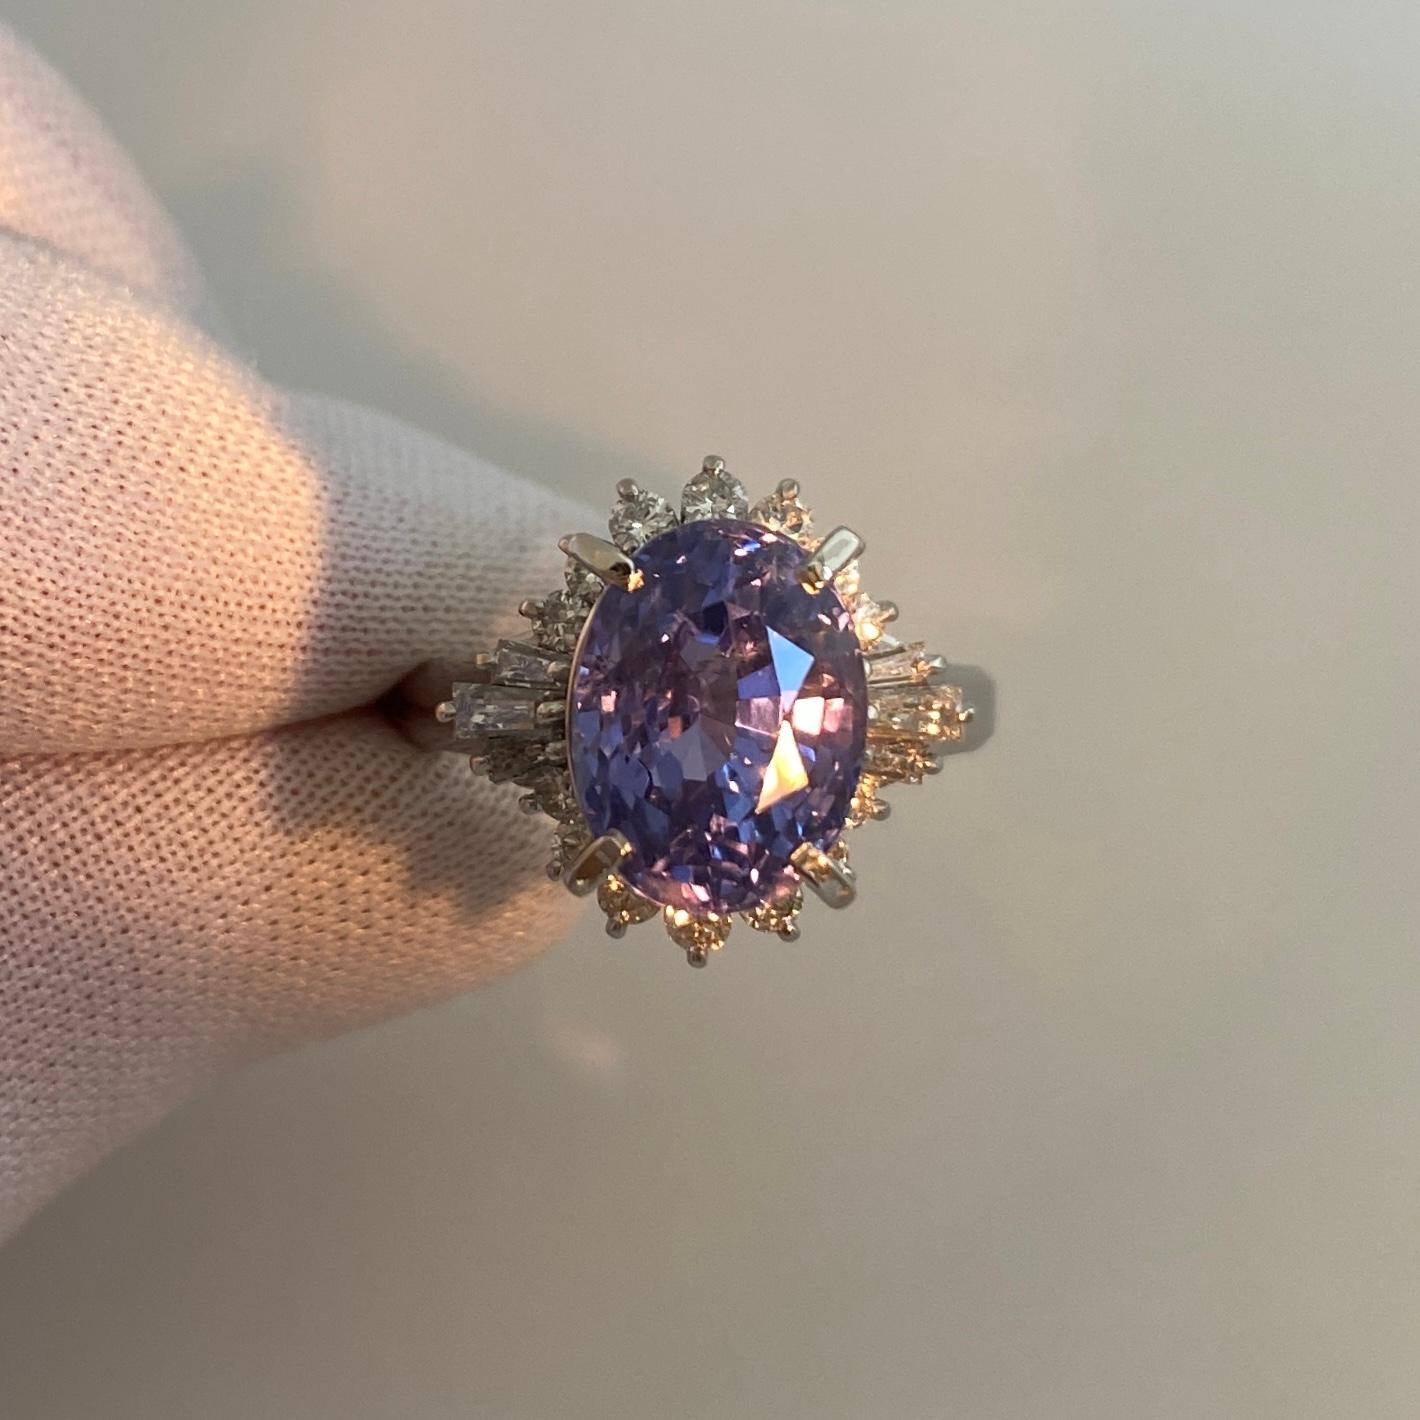 Oval Cut GIA Certified 7.08 Carat Untreated Color Change Sapphire & Diamond Cocktail Ring